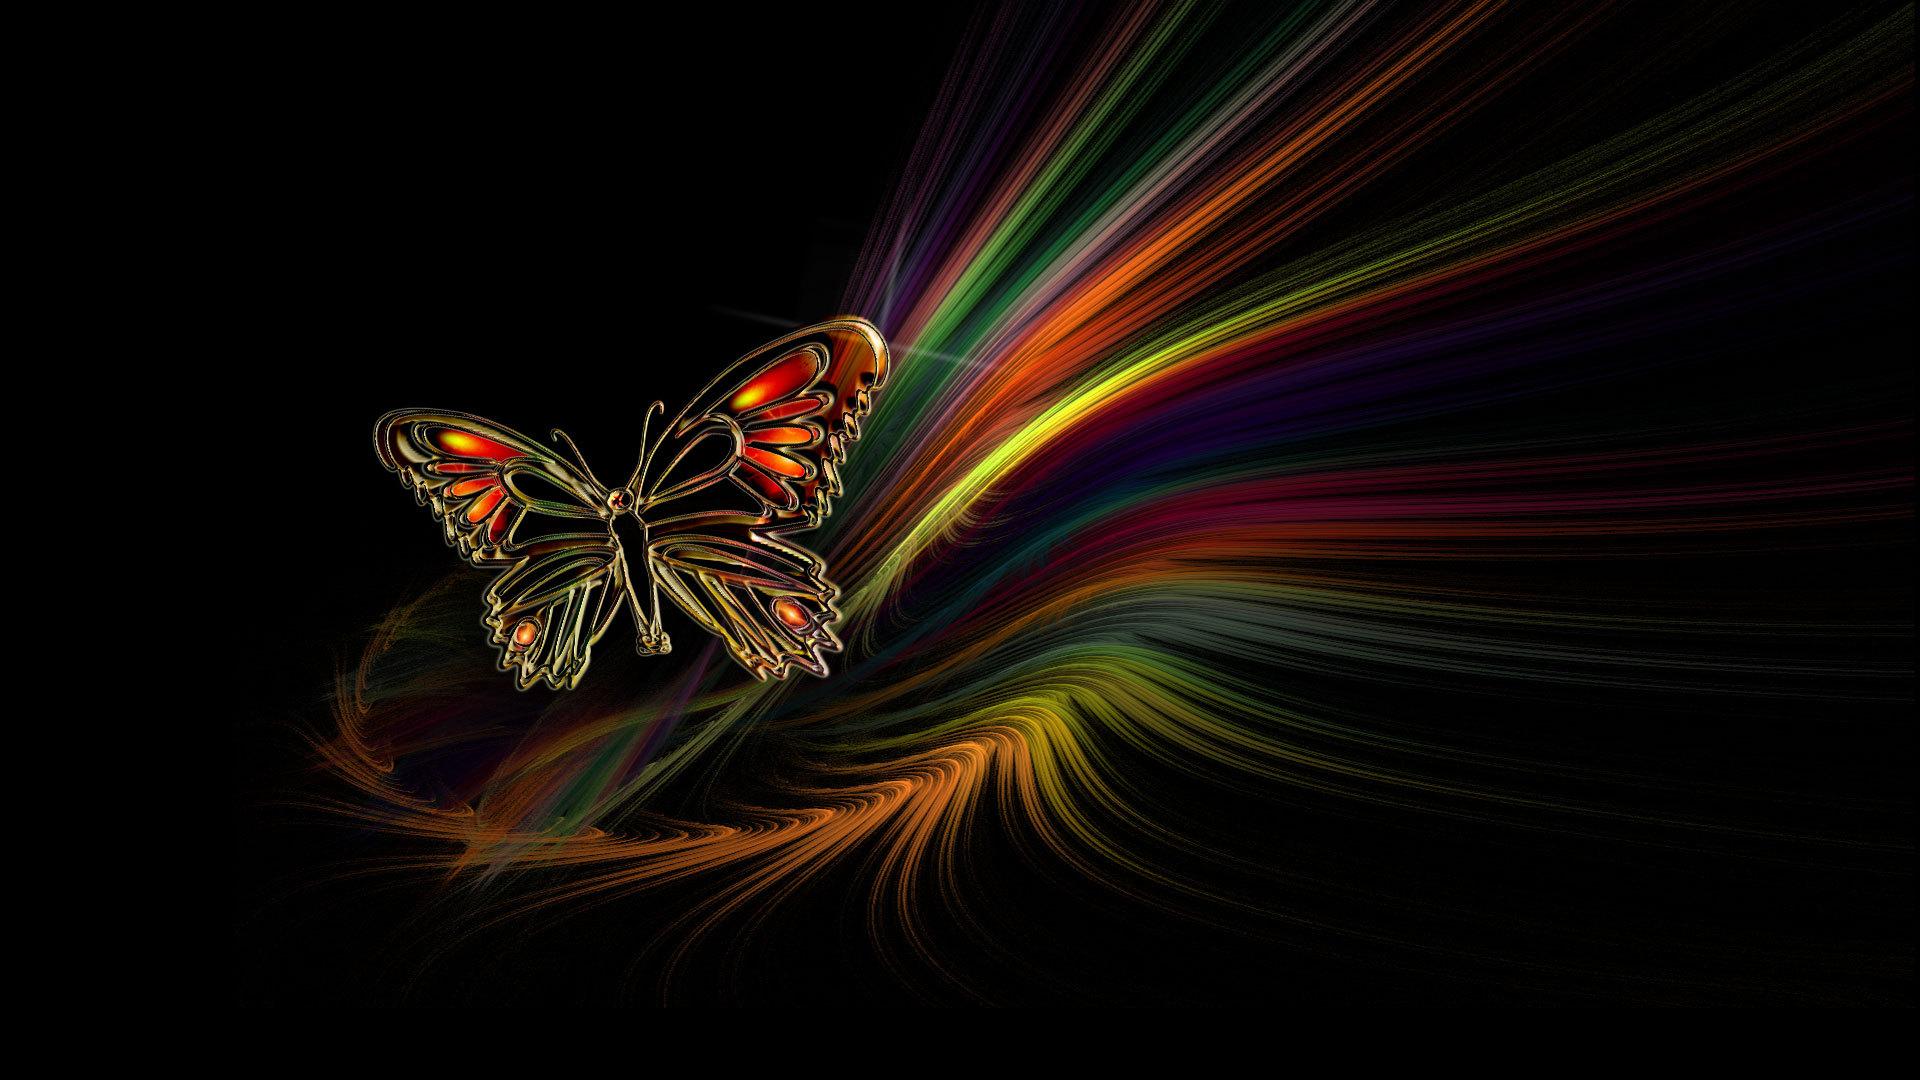 Butterfly Abstract HD Wallpaper Cool Unique